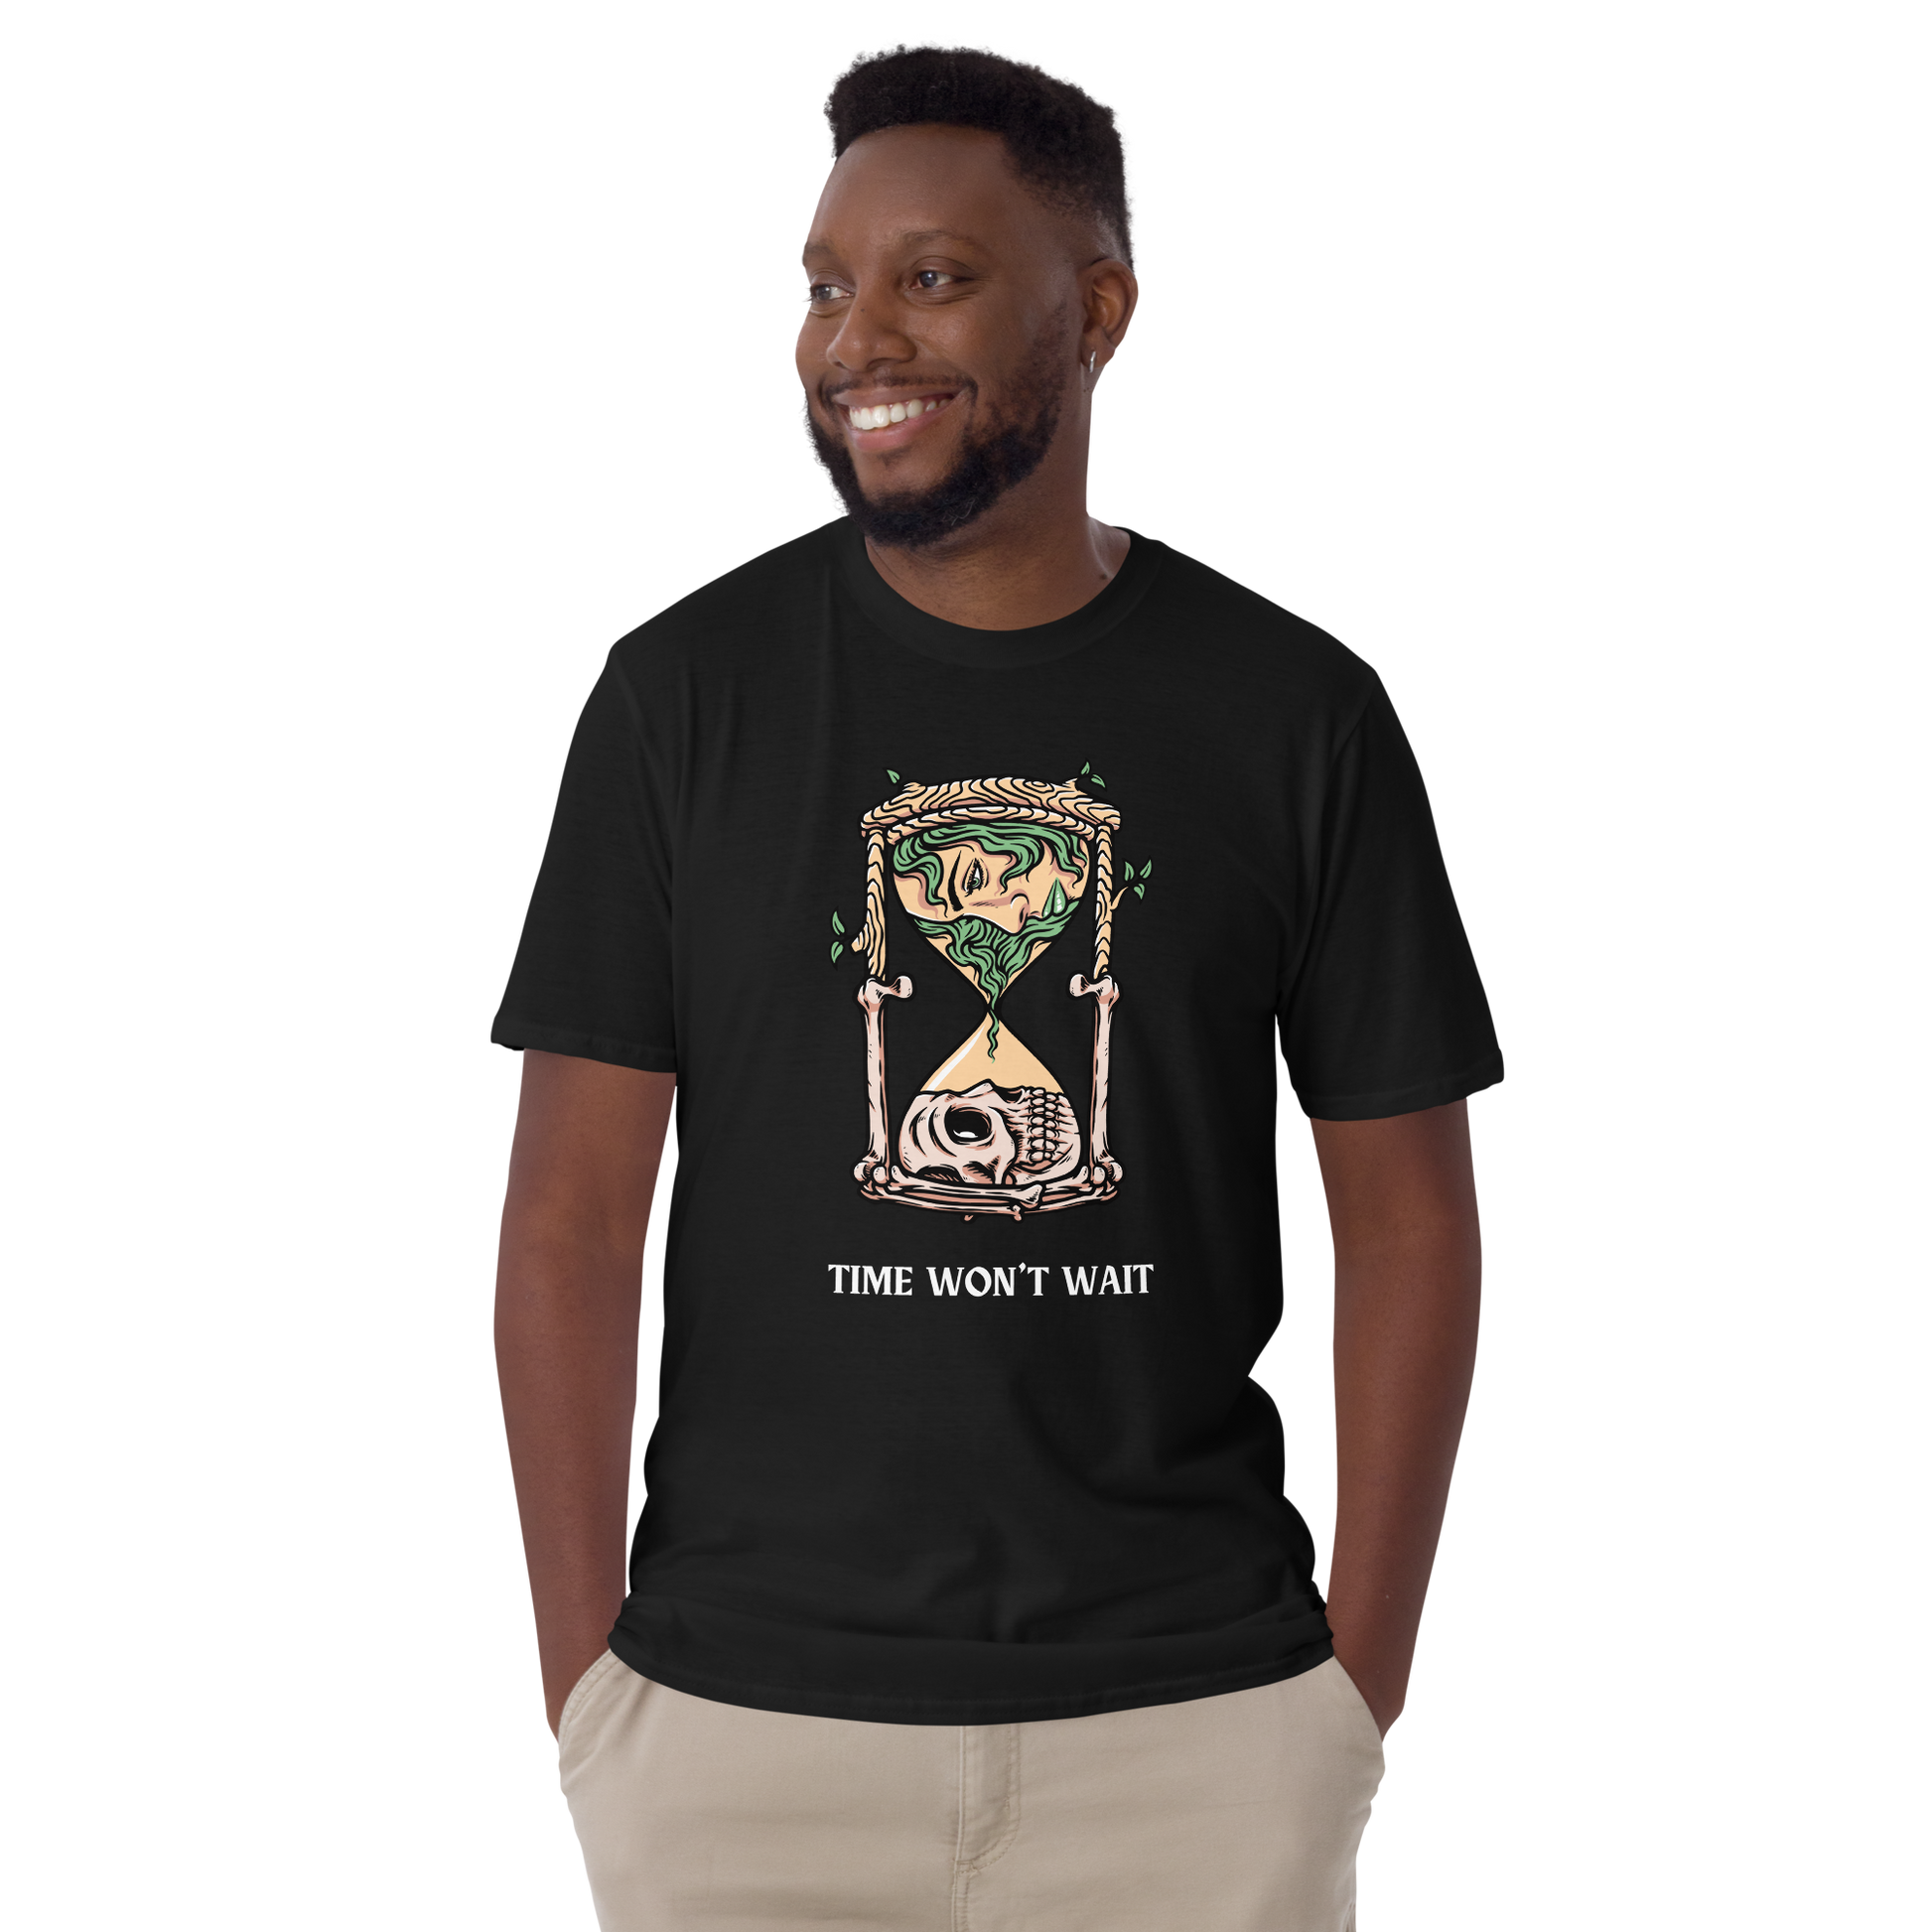 Smiling man wearing a Black Hourglass T-Shirt featuring a captivating Time Won't Wait graphic on the chest - Cool Graphic Hourglass T-Shirts - Boozy Fox